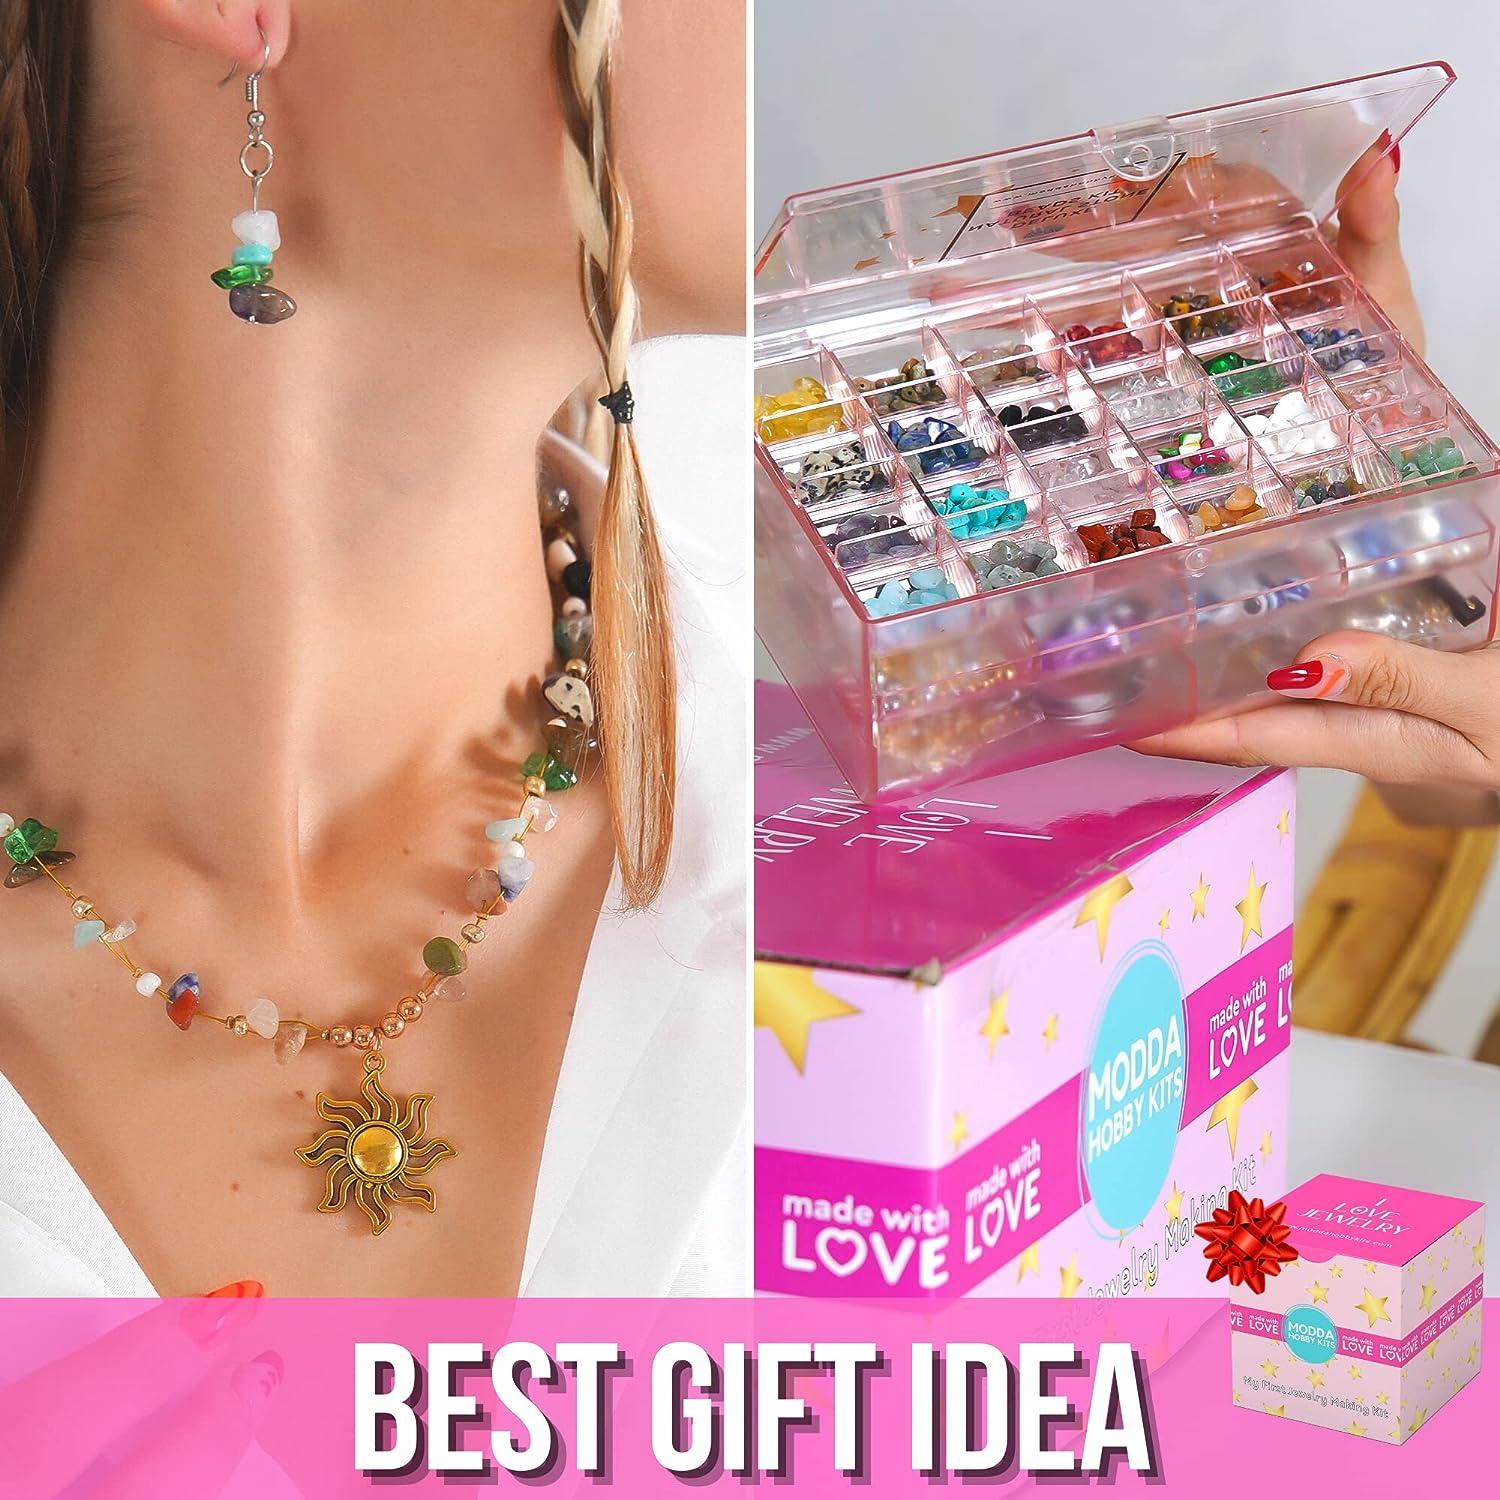 Natural Jewelry Making Class in a Box! Kit for Beginners at